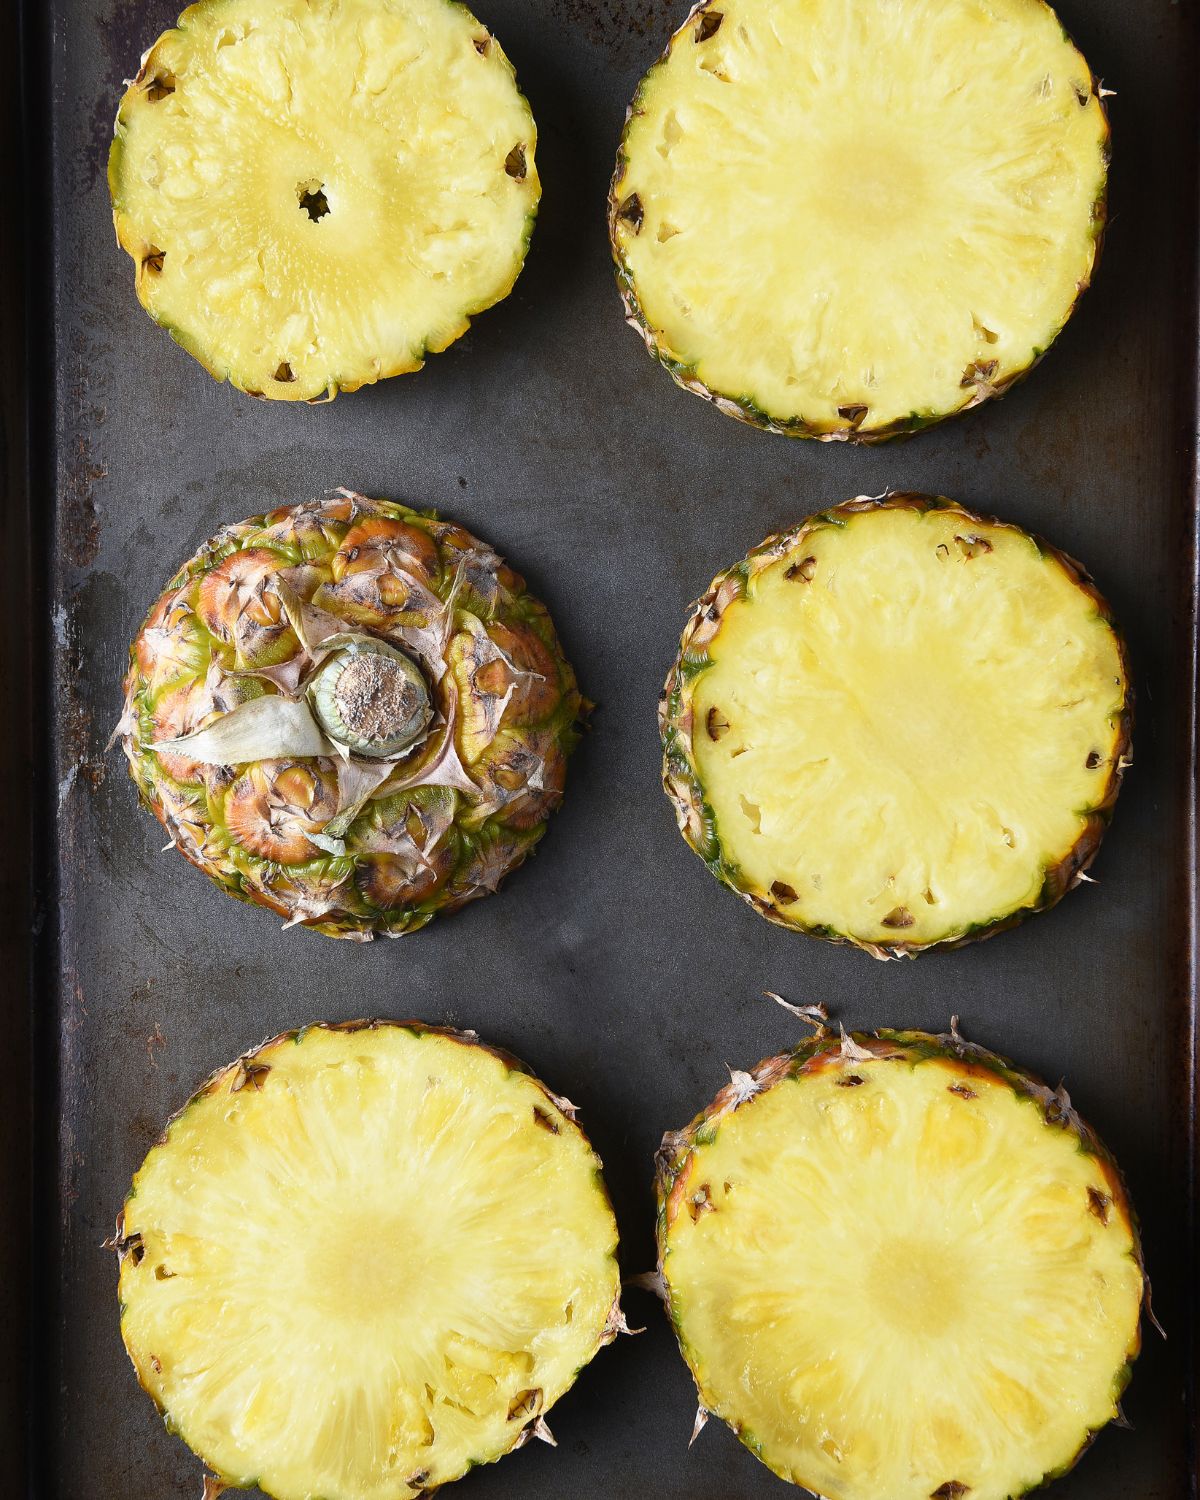 Pineapple rounds.